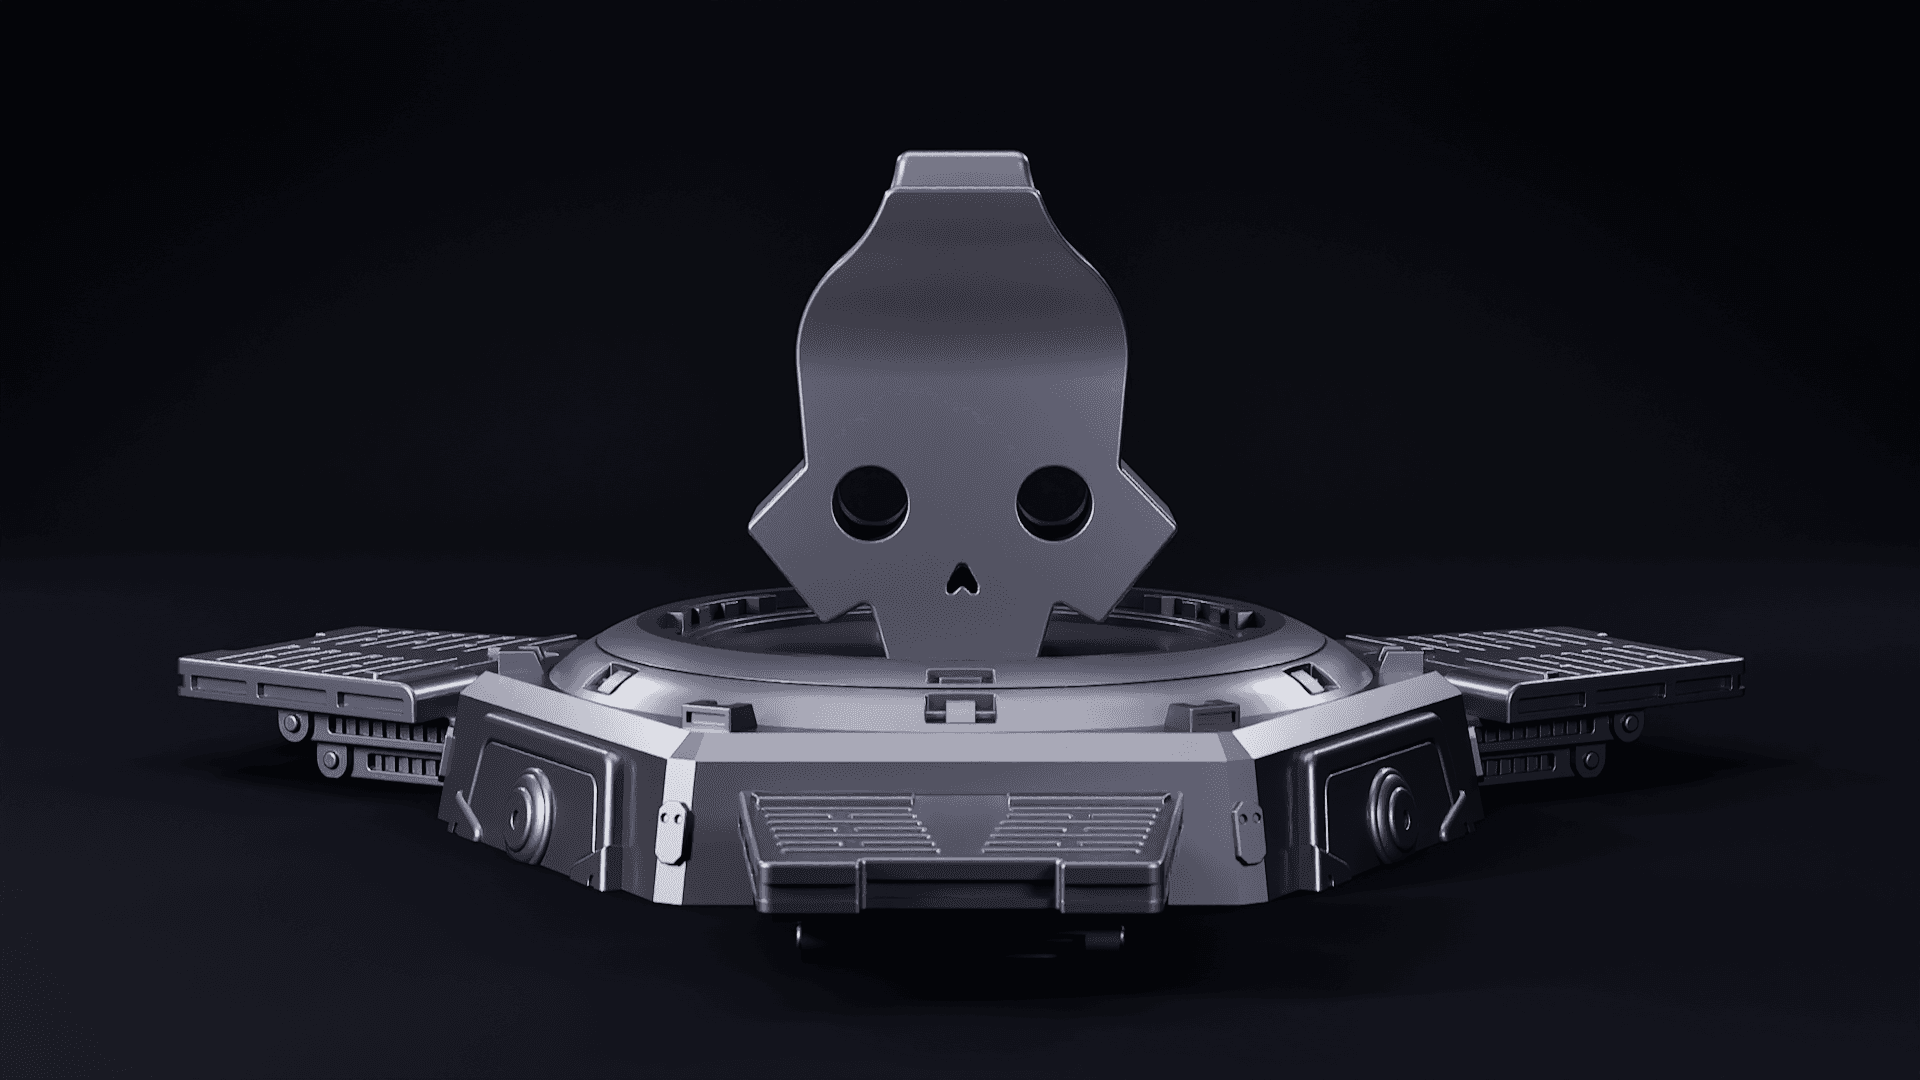 HELLDIVERS HELLPOD CONTROLLER STAND 3d model